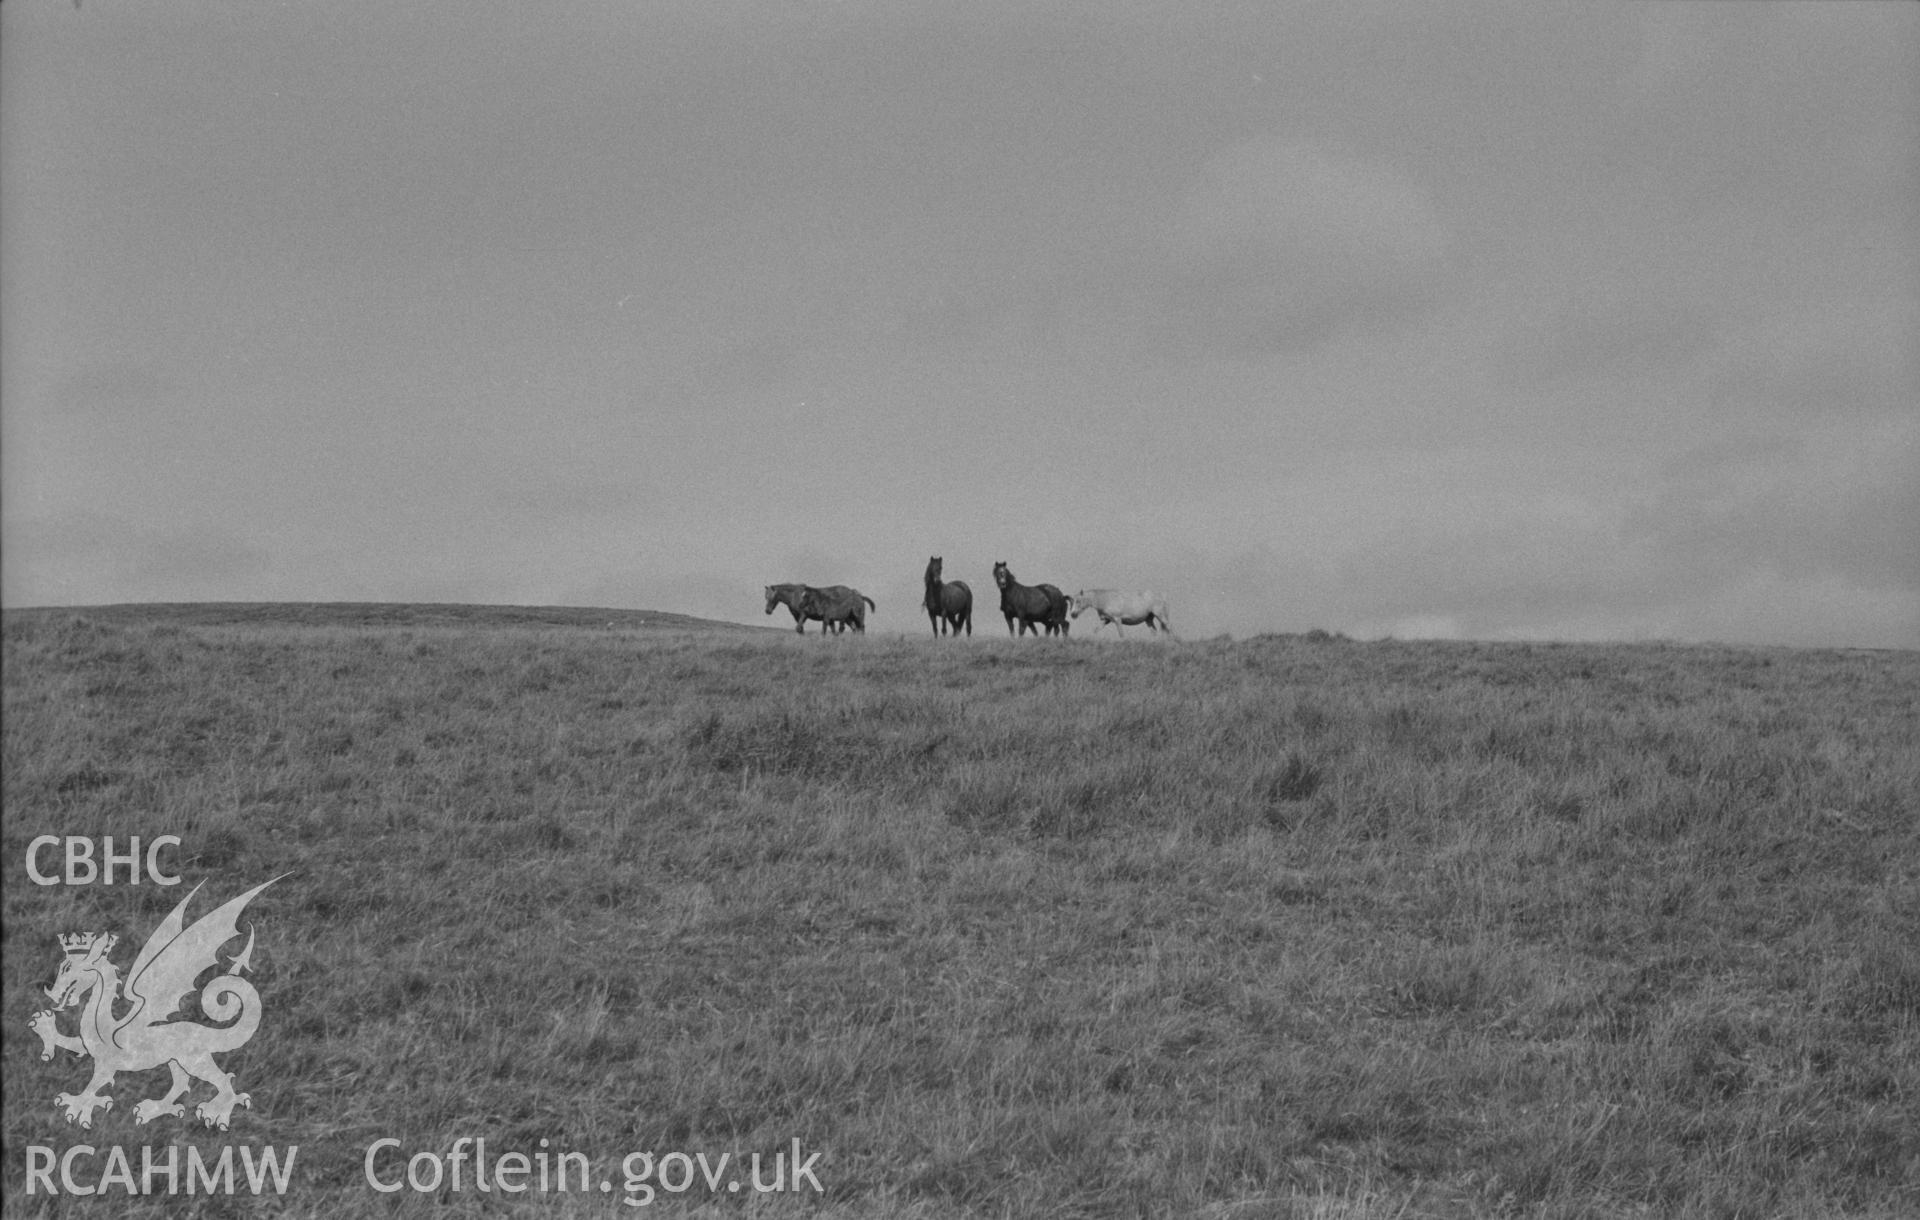 Digital copy of a black and white negative showing landscape view with horses at Drygarn Fawr, in the Cambrian Mountains. Photographed by Arthur O. Chater in September 1964.